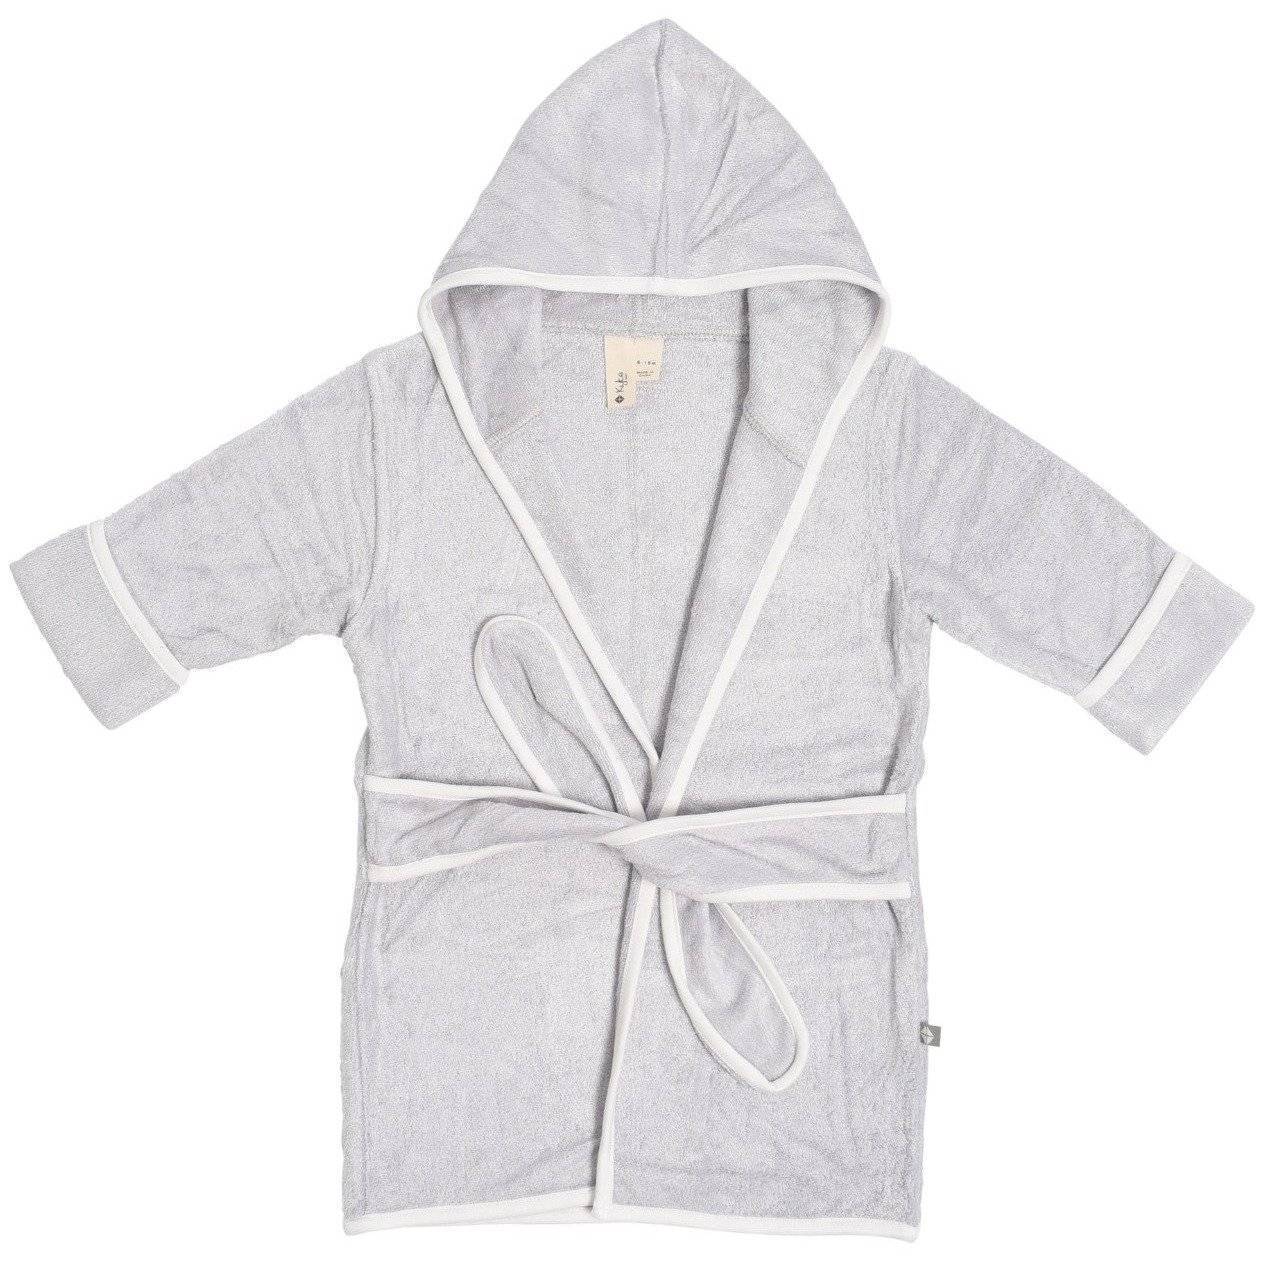 Kyte Baby Home and Bath Toddler Bath Robe in Storm with Cloud Trim